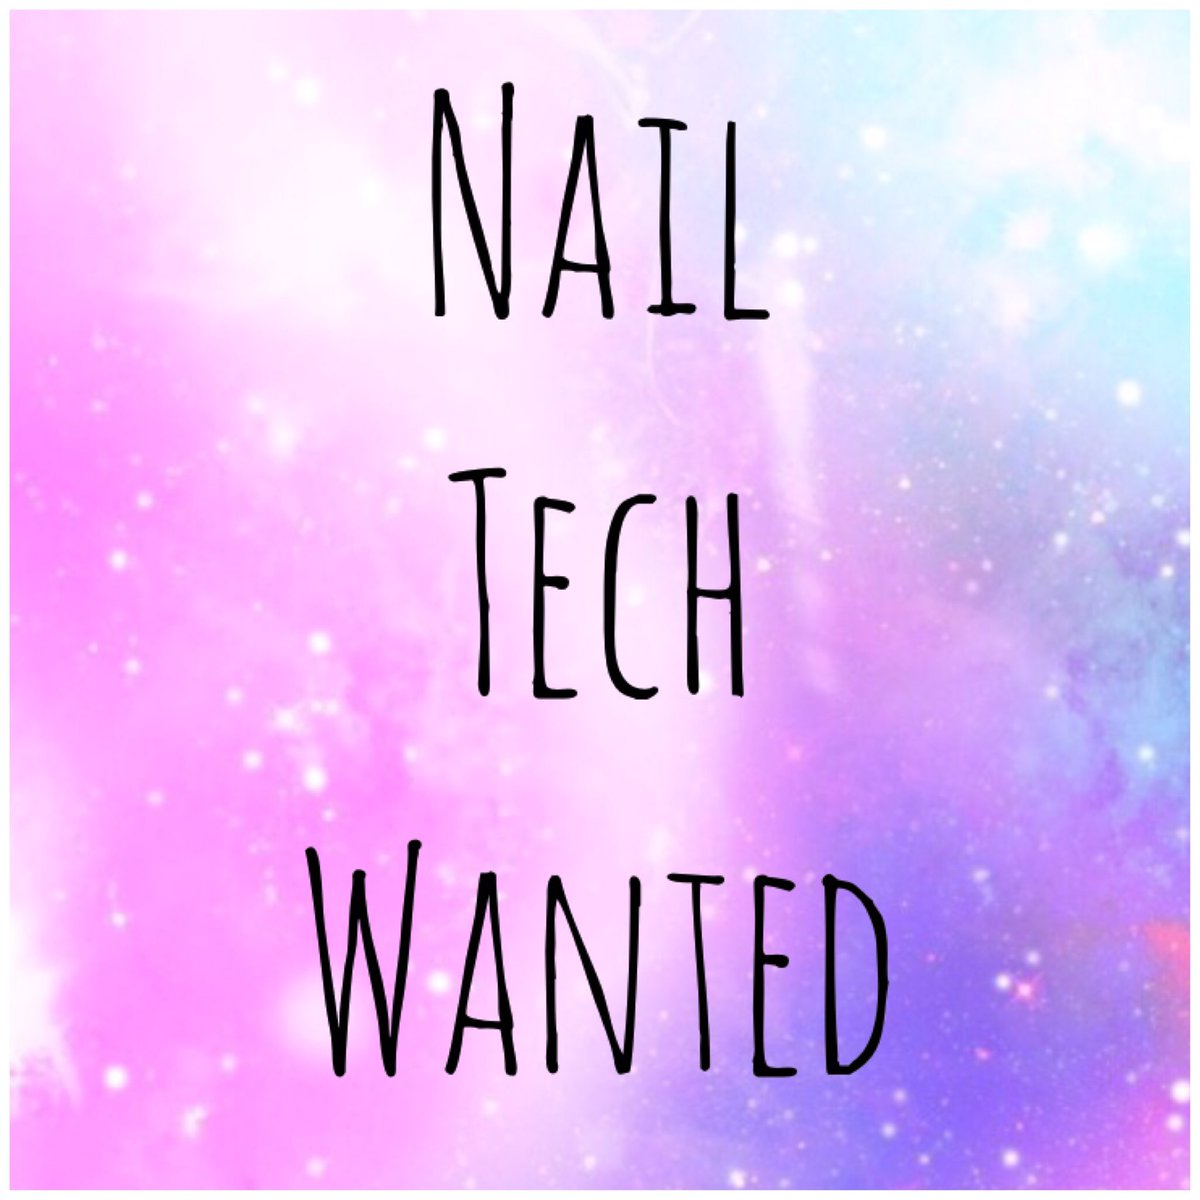 Ann Marie Nails & Beauty - NAILS TECHNICIAN WANTED !!! I'm looking very  talented nail technician who loves her job and do nails with a passion  💅👍👌👏 So, if you: ✓want to